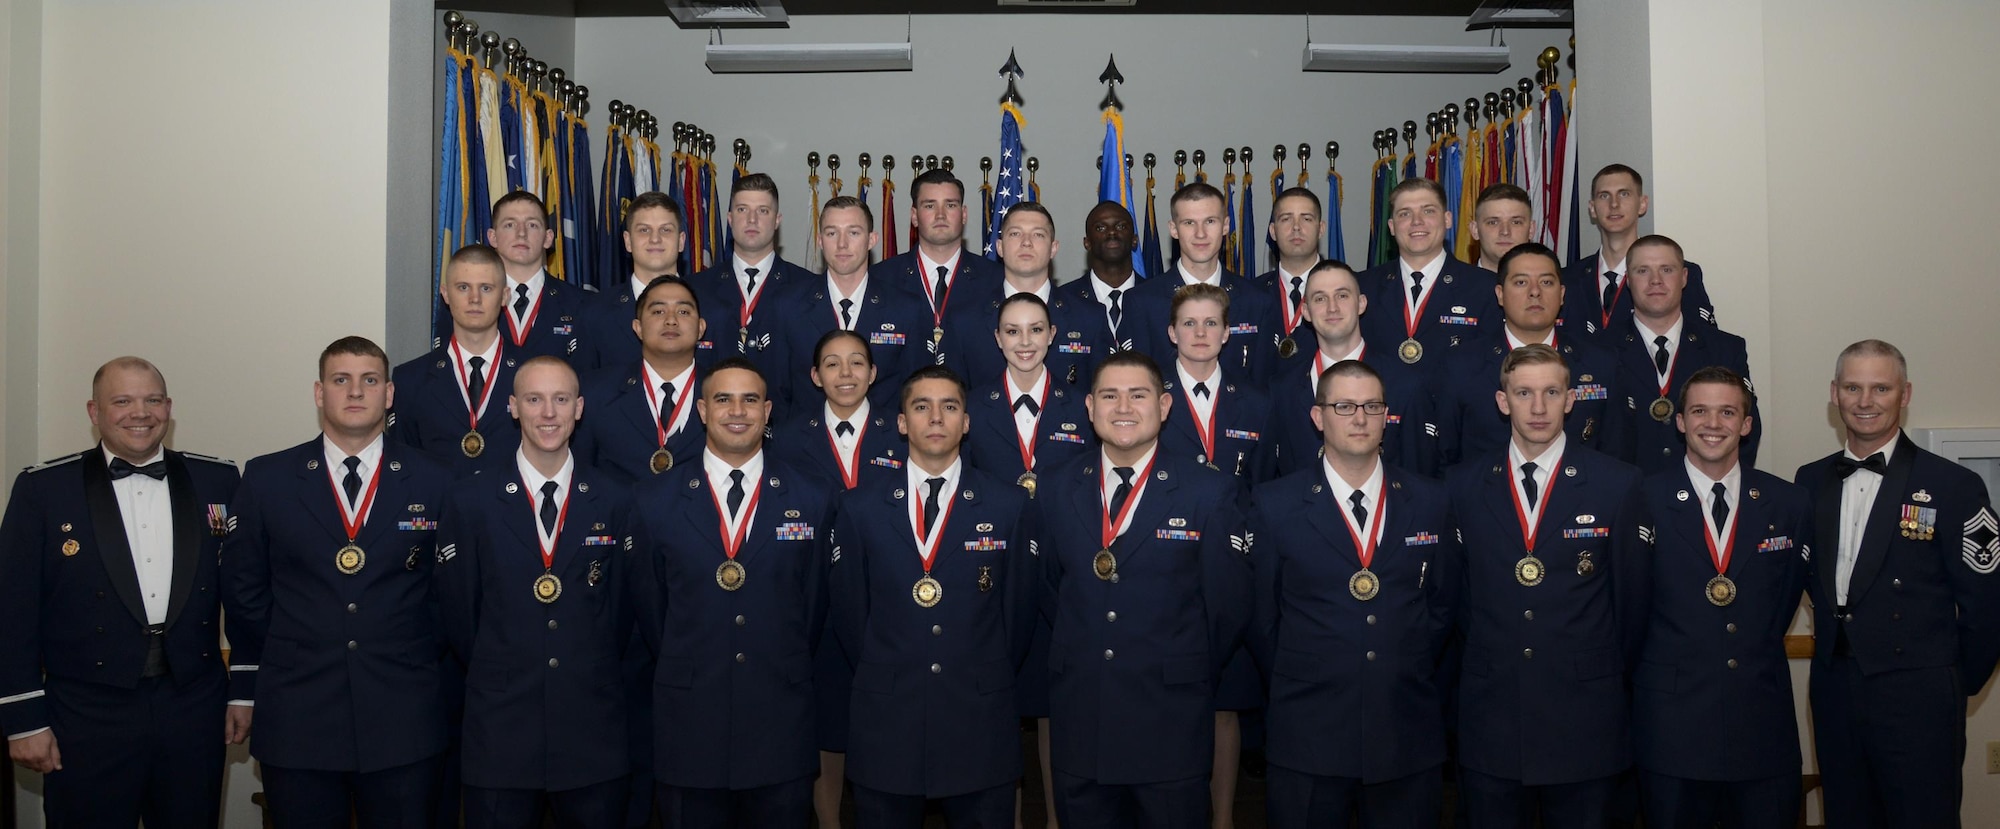 Col. Matthew Dillow, 90th Missile Wing vice commander, and Chief Master Sgt. John Facemire, 90th Mission Support Group chief enlisted manager, pose with the graduating Airman Leadership School Class 13-E students in the Trail's End Event Center on F.E. Warren Air Force Base, Wyo., May 18, 2016. Enlisted Airmen must complete the rigorous professional military education course to become supervisors of other Airmen. (U.S. Air Force photo by Senior Airman Jason Wiese)